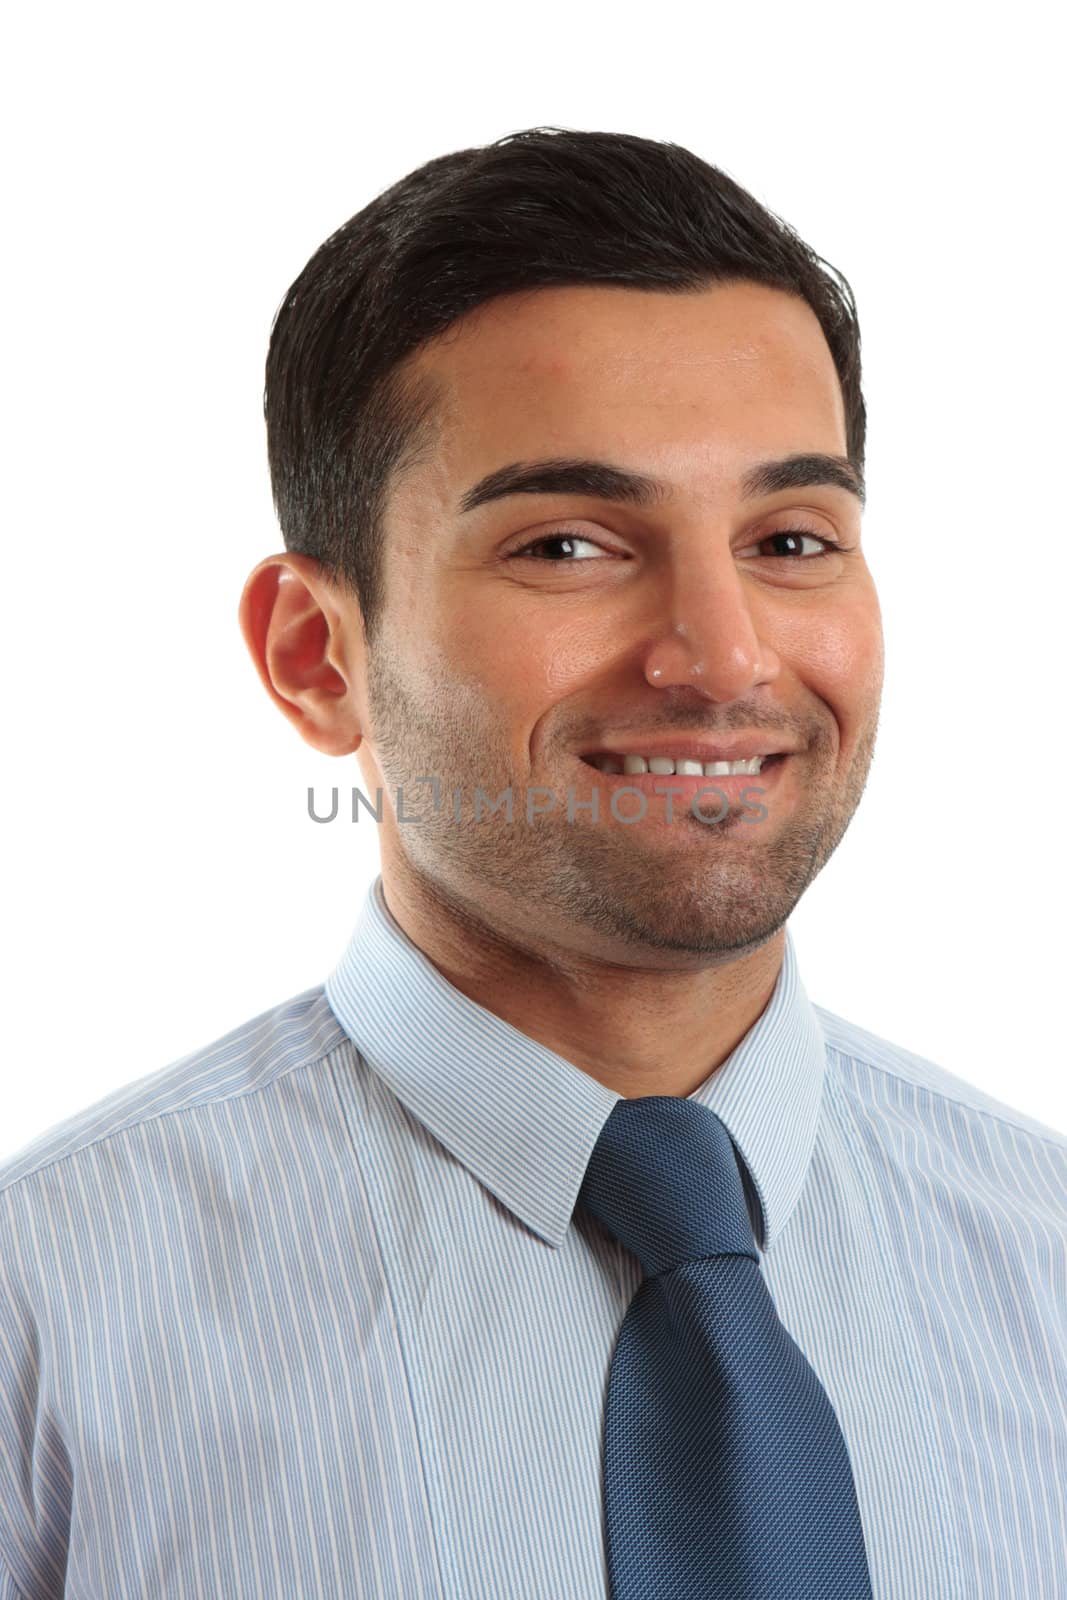 Smiling businessman wearing a blue pinstripe shirt and blue tie.  White background.